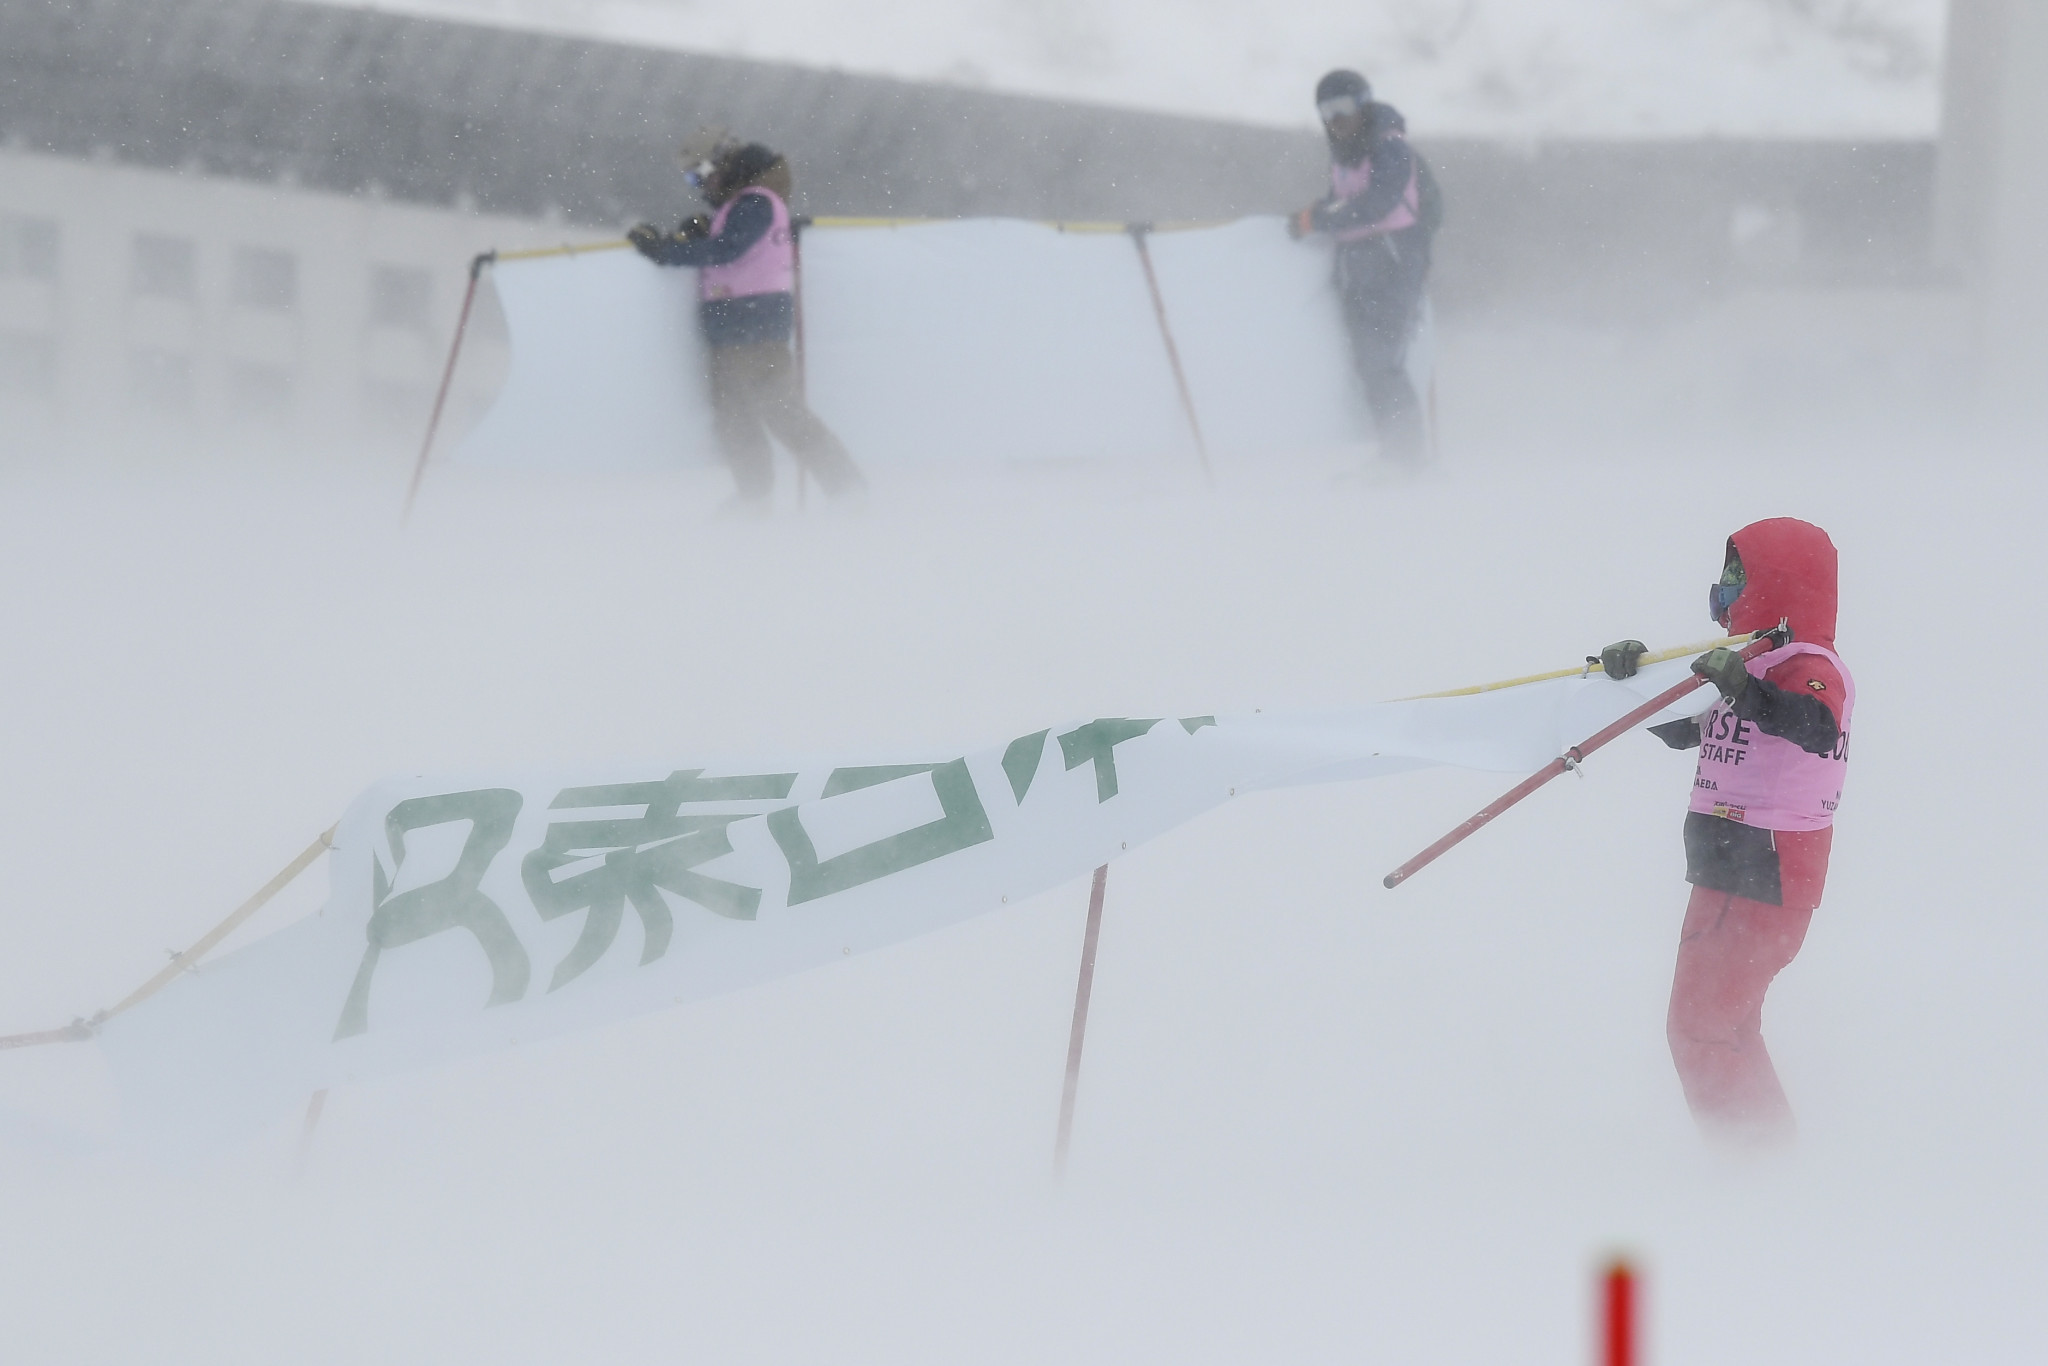 Alpine Skiing World Cup in Naeba cancelled due to high winds